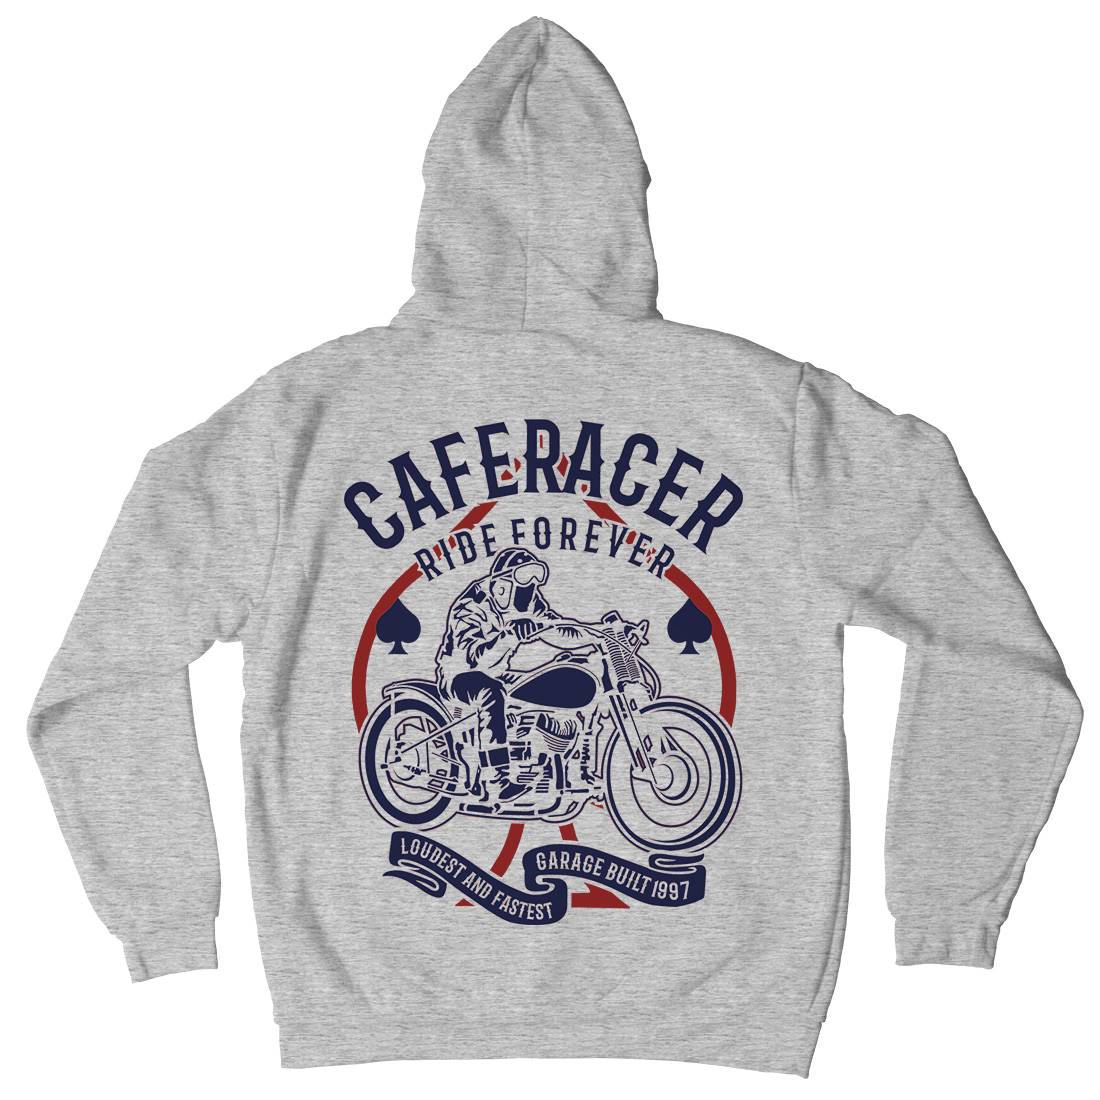 Caferacer Ride Forever Kids Crew Neck Hoodie Motorcycles B192